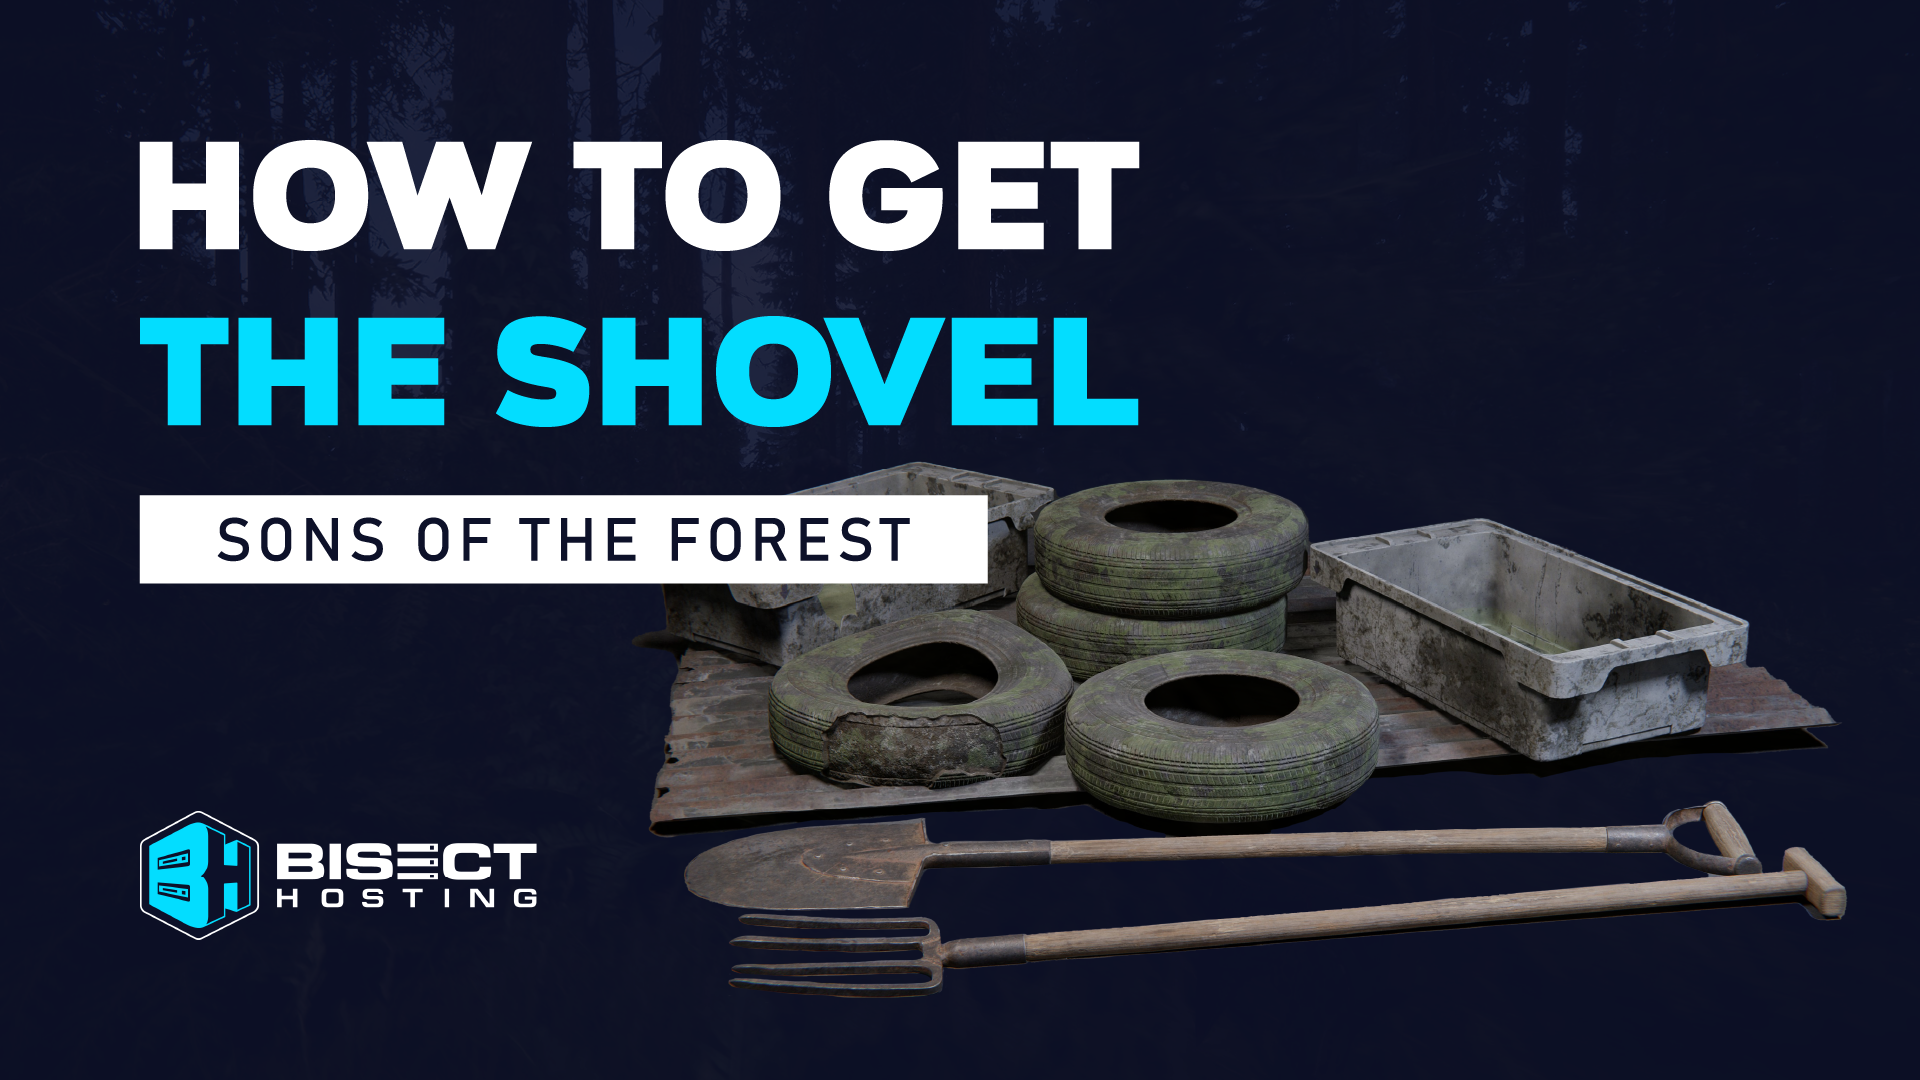 how to get a shovel and son of the forest｜TikTok Search